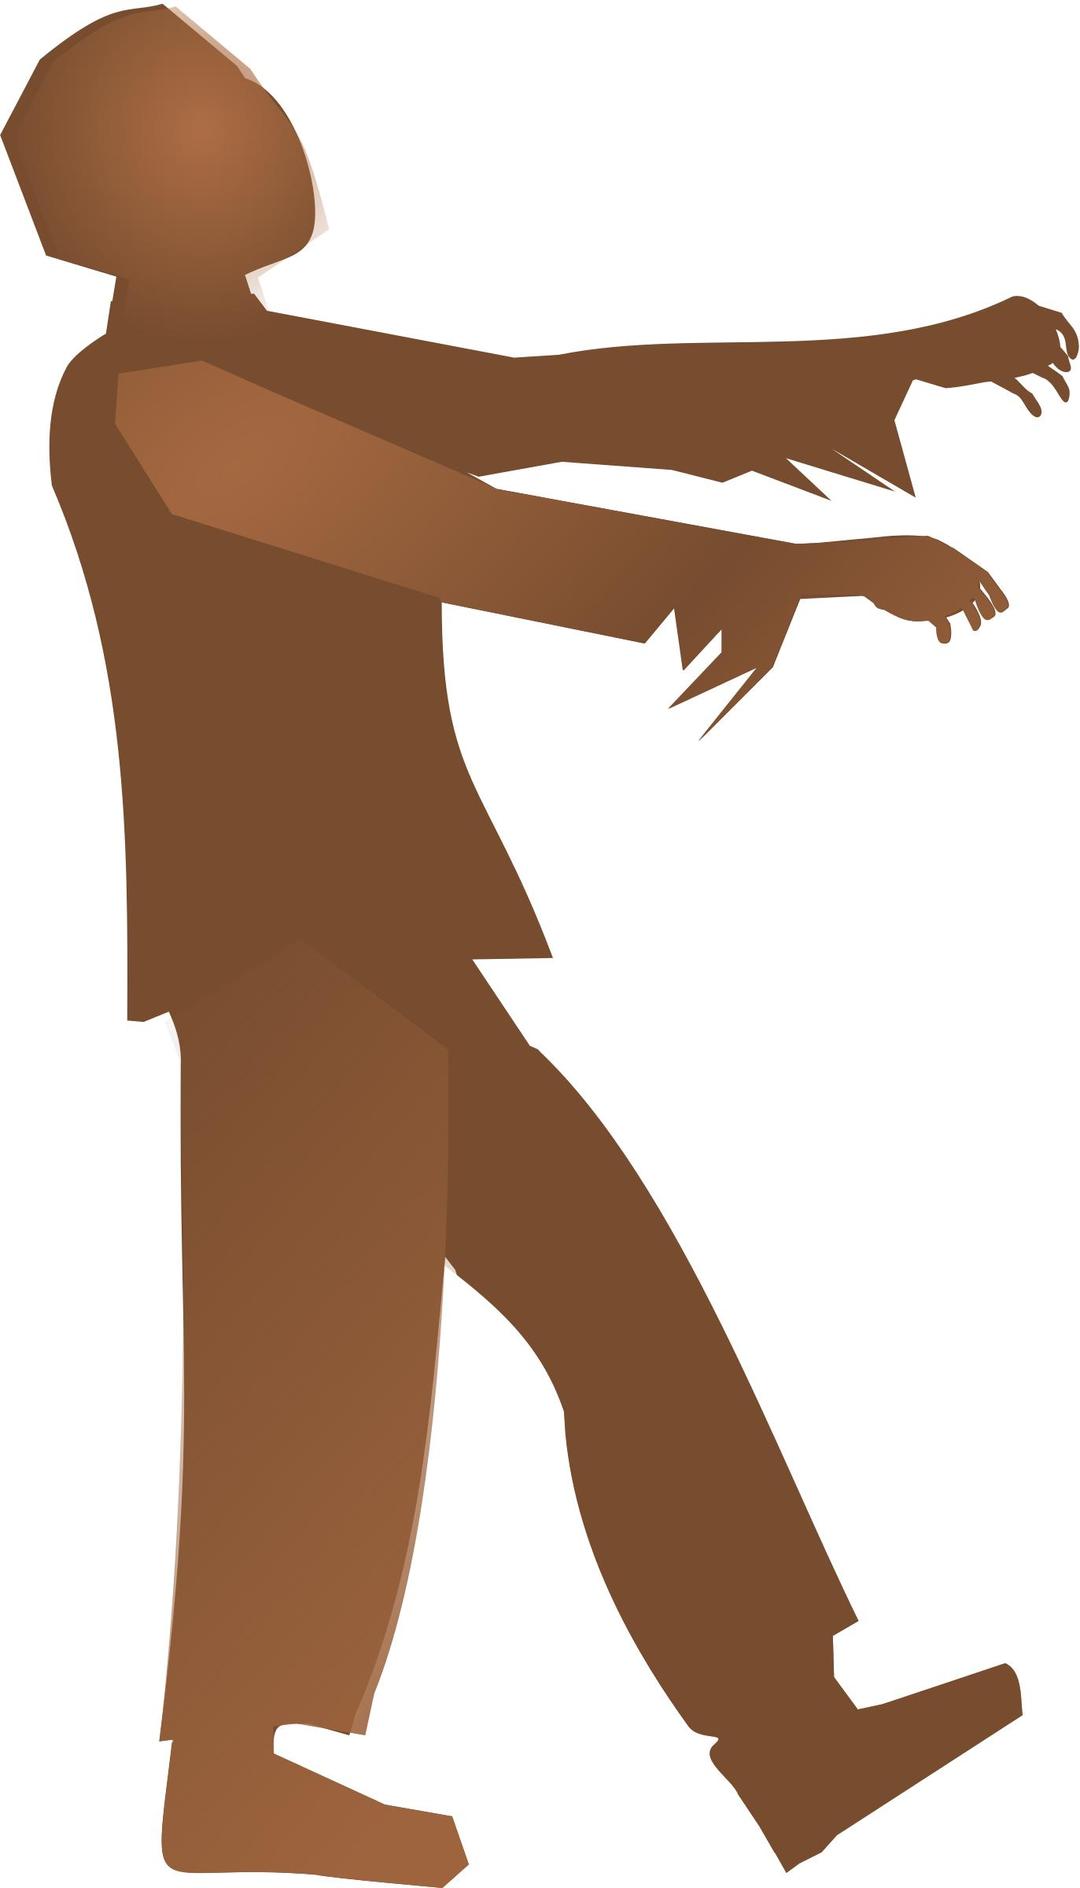 Zombie Silhouette 2 png transparent